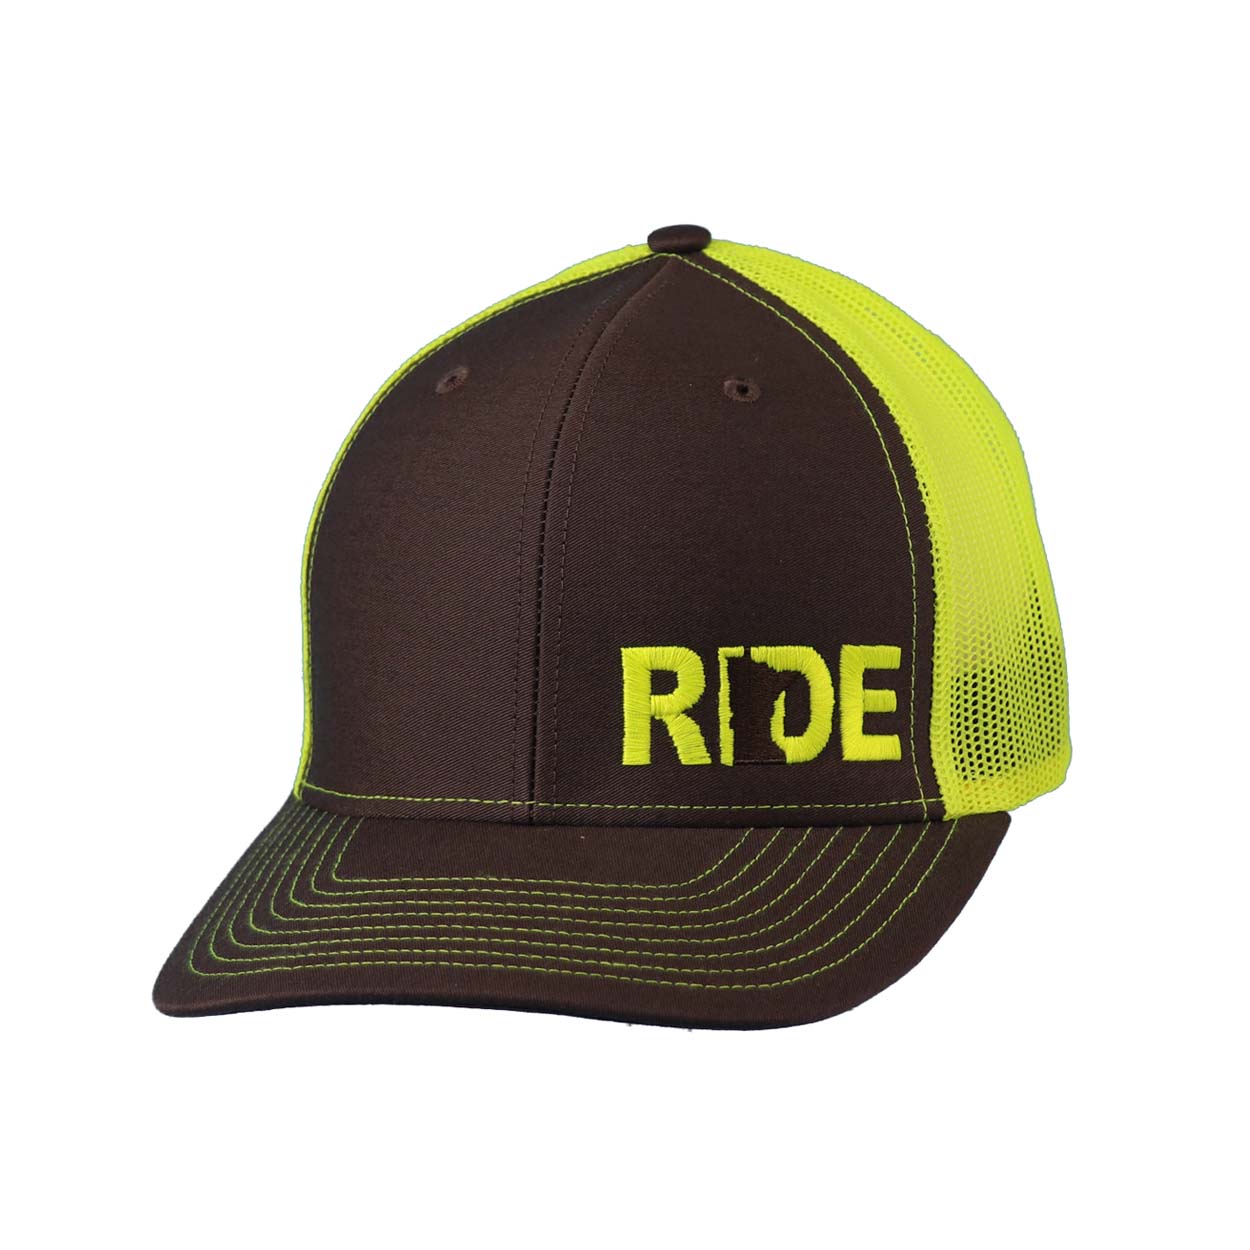 Ride Minnesota Classic Pro Night Out Embroidered Snapback Trucker Hat Gray/Neon Yellow